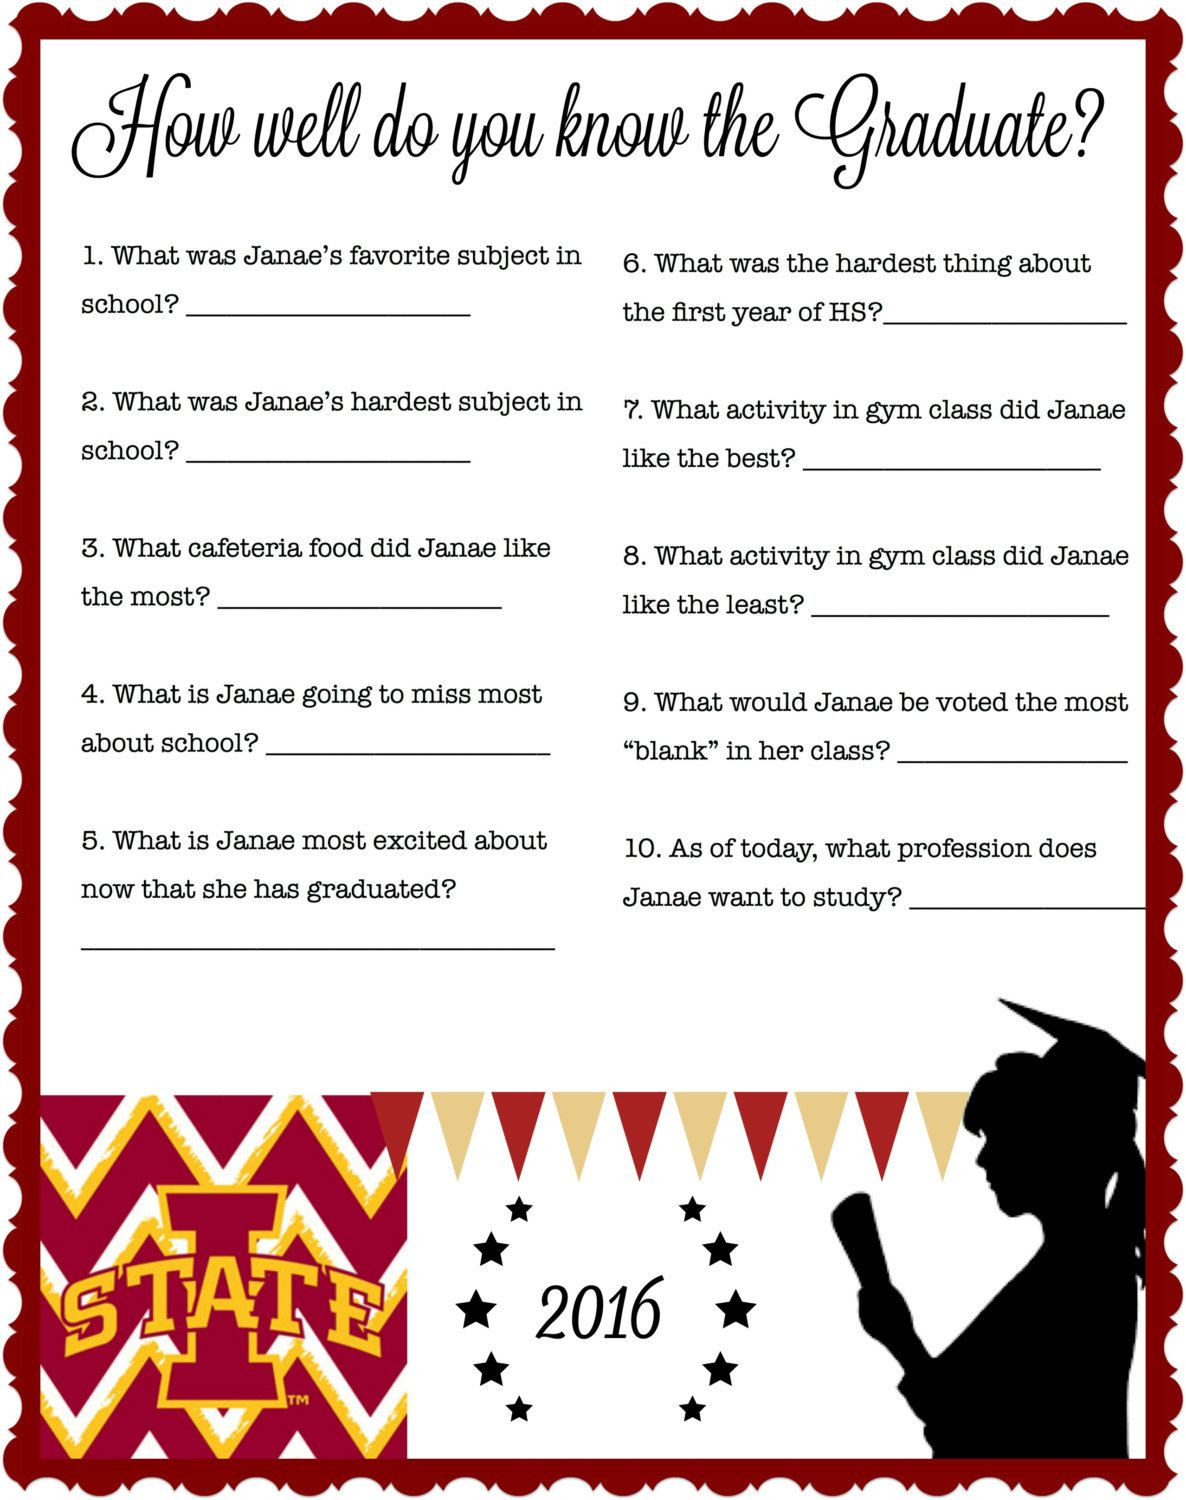 Game Ideas For Graduation Party
 College Graduation Party Game Who knows the graduate the